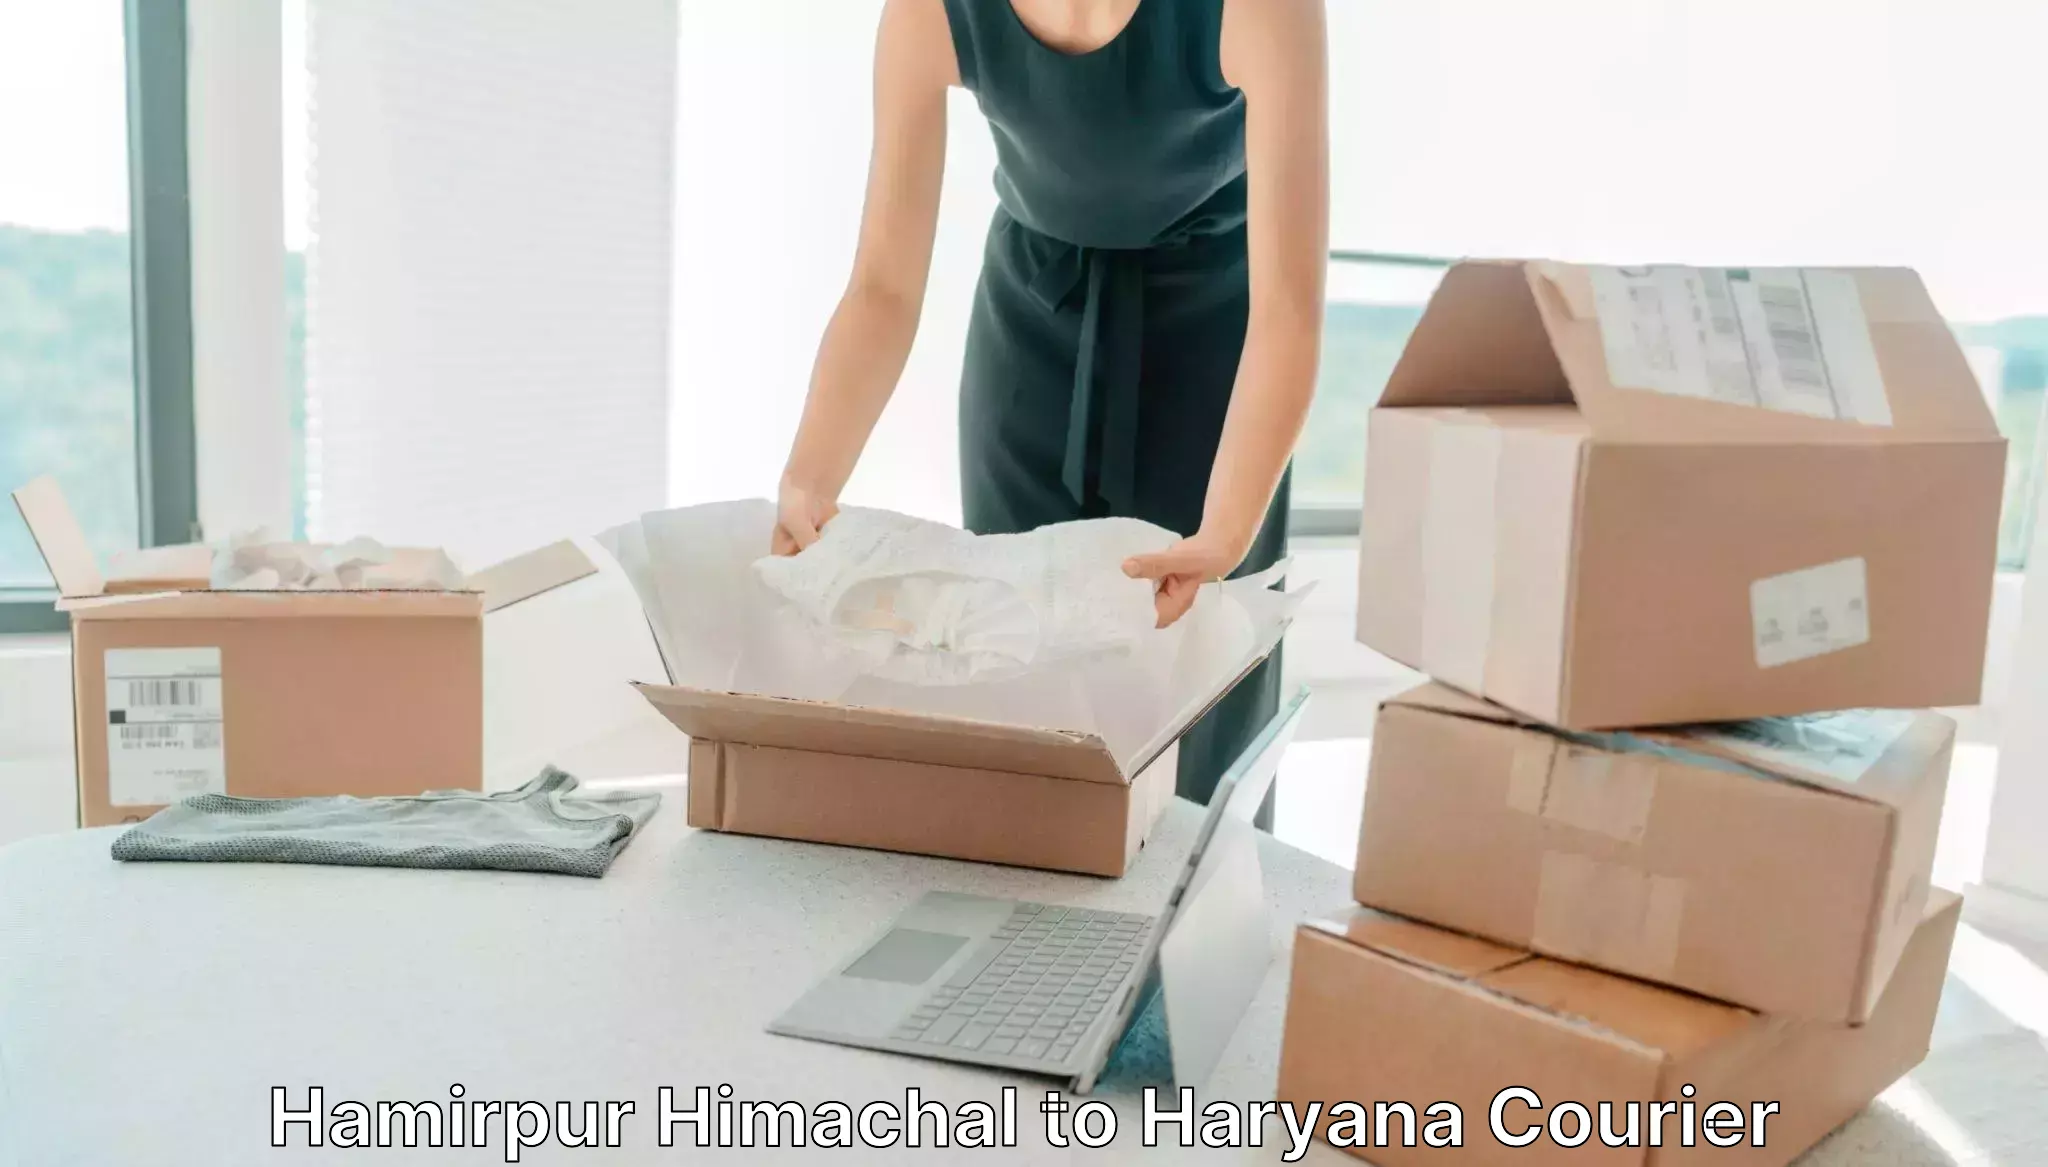 Optimized courier strategies Hamirpur Himachal to Dharuhera